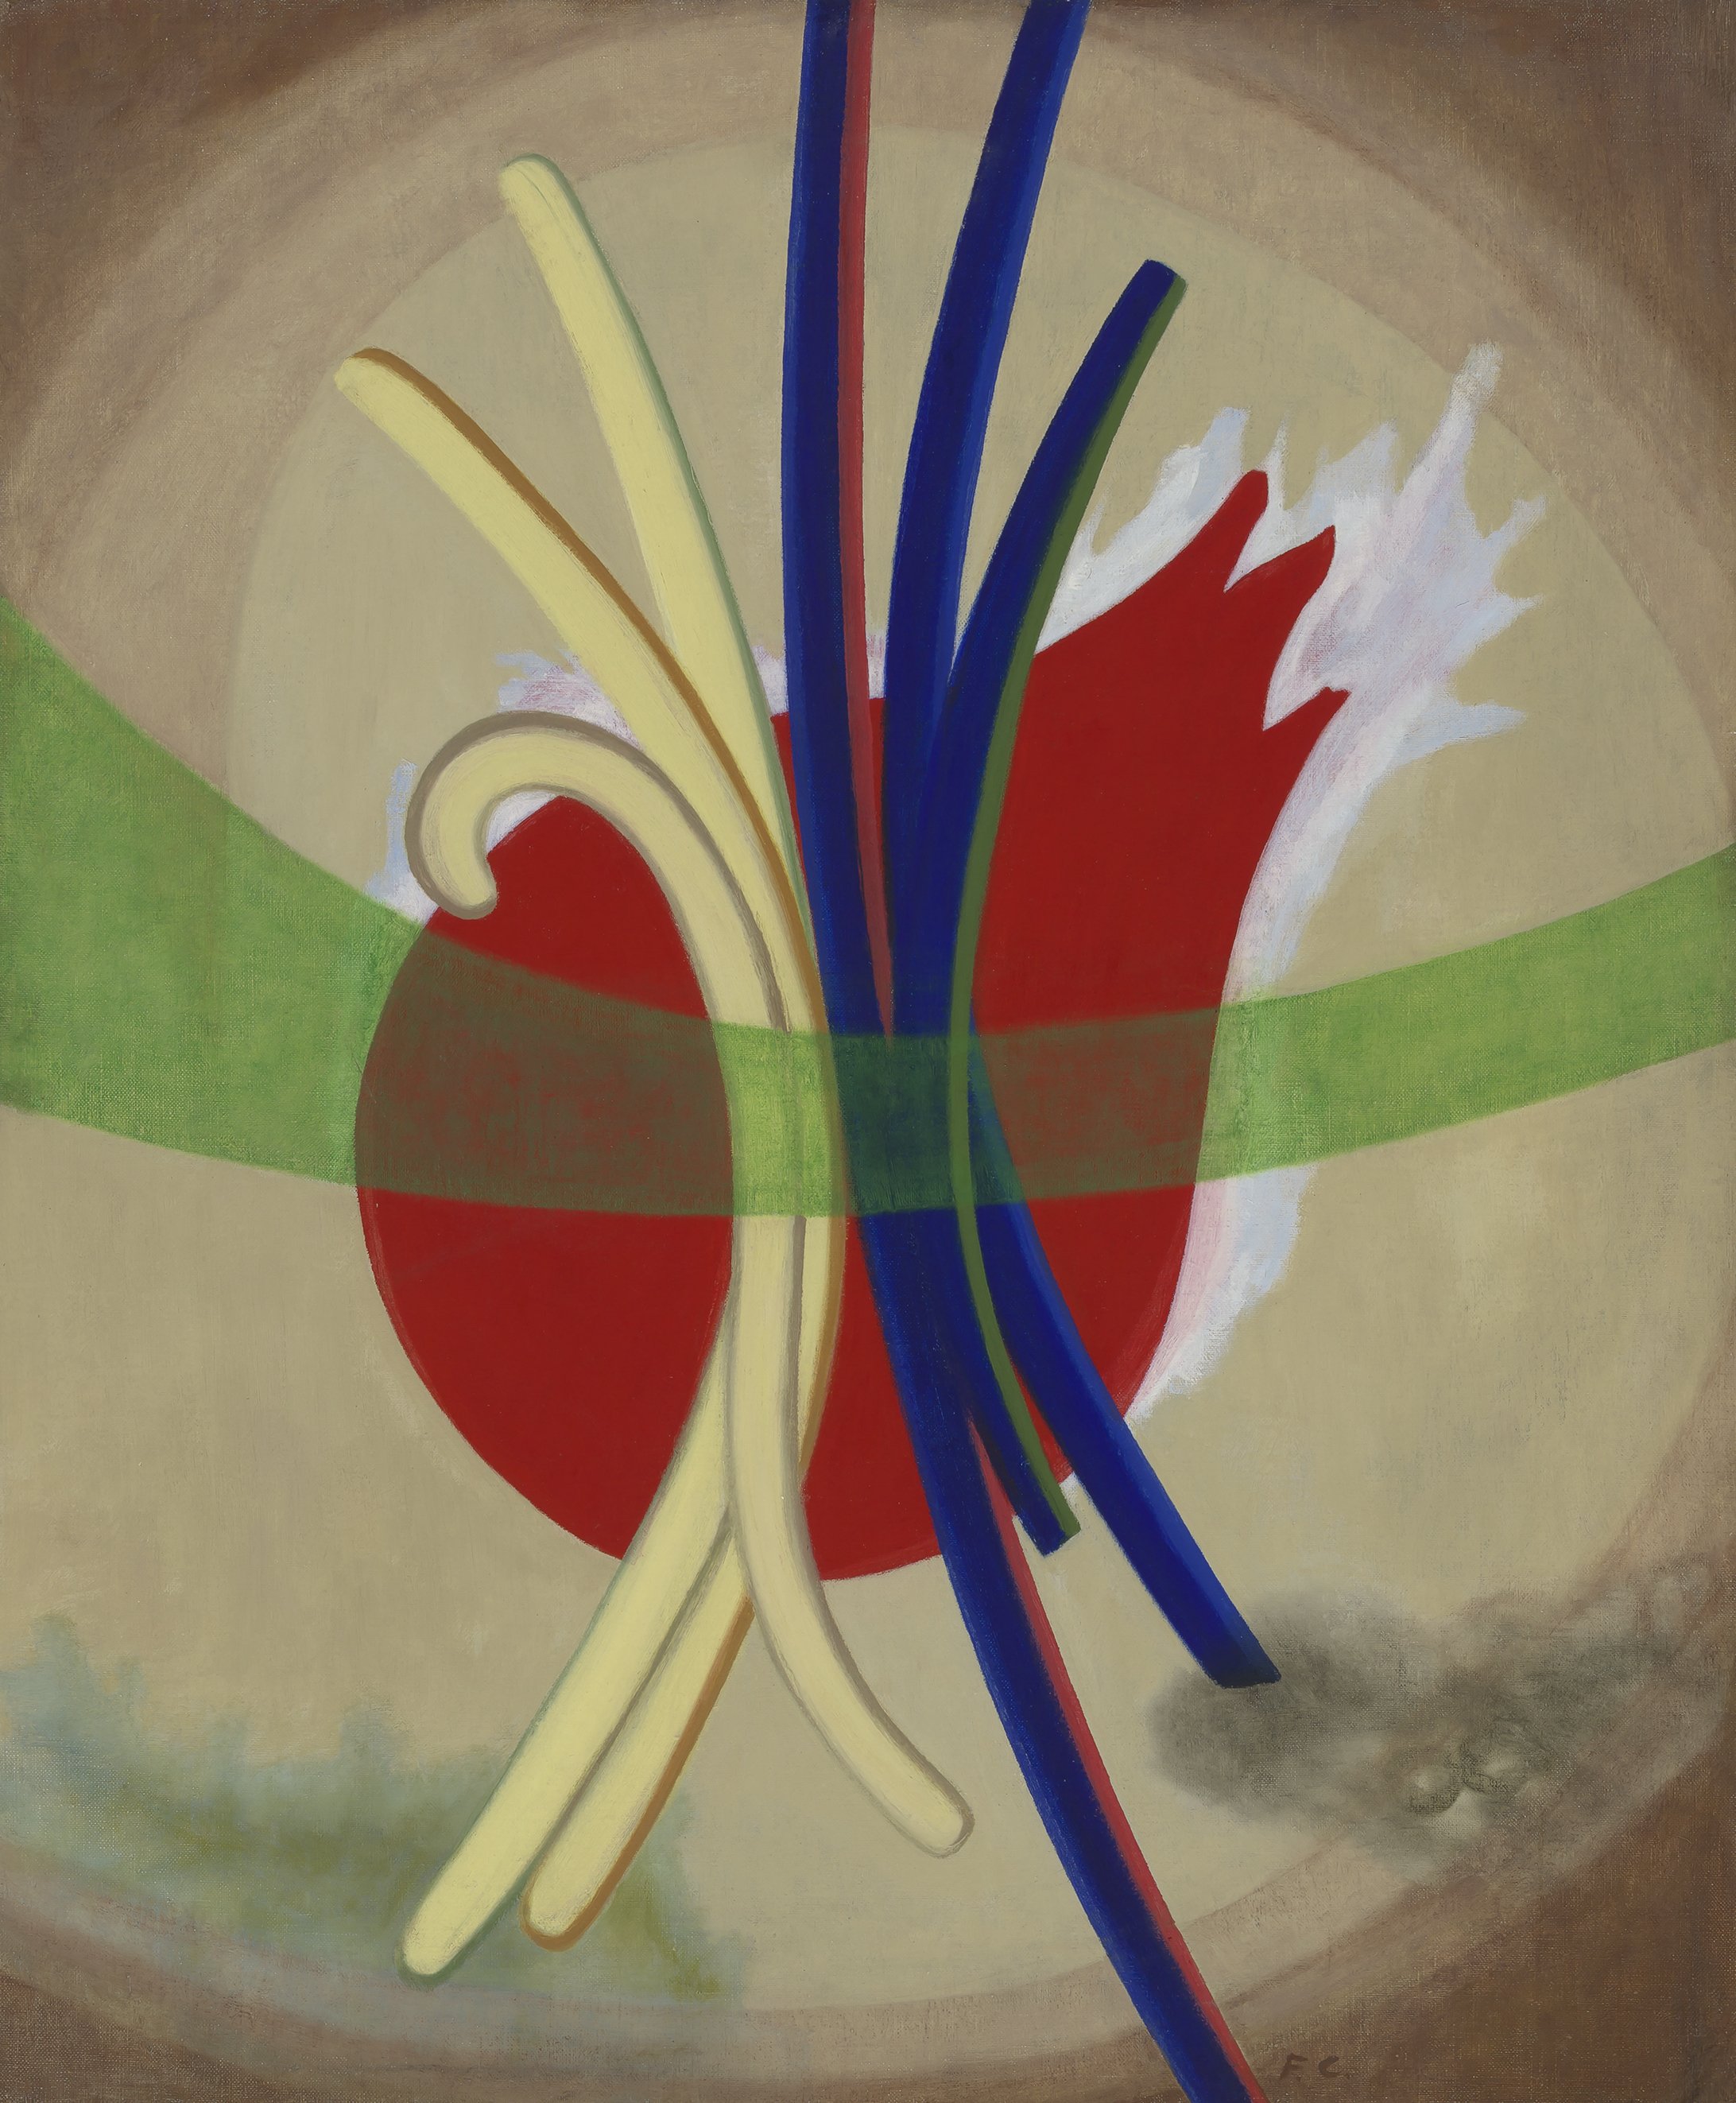 Biomorphic abstraction of clashing elongated yellow and blue shapes overlaying a flat red teardrop shape on a brown background with a horizontal green stripe across.